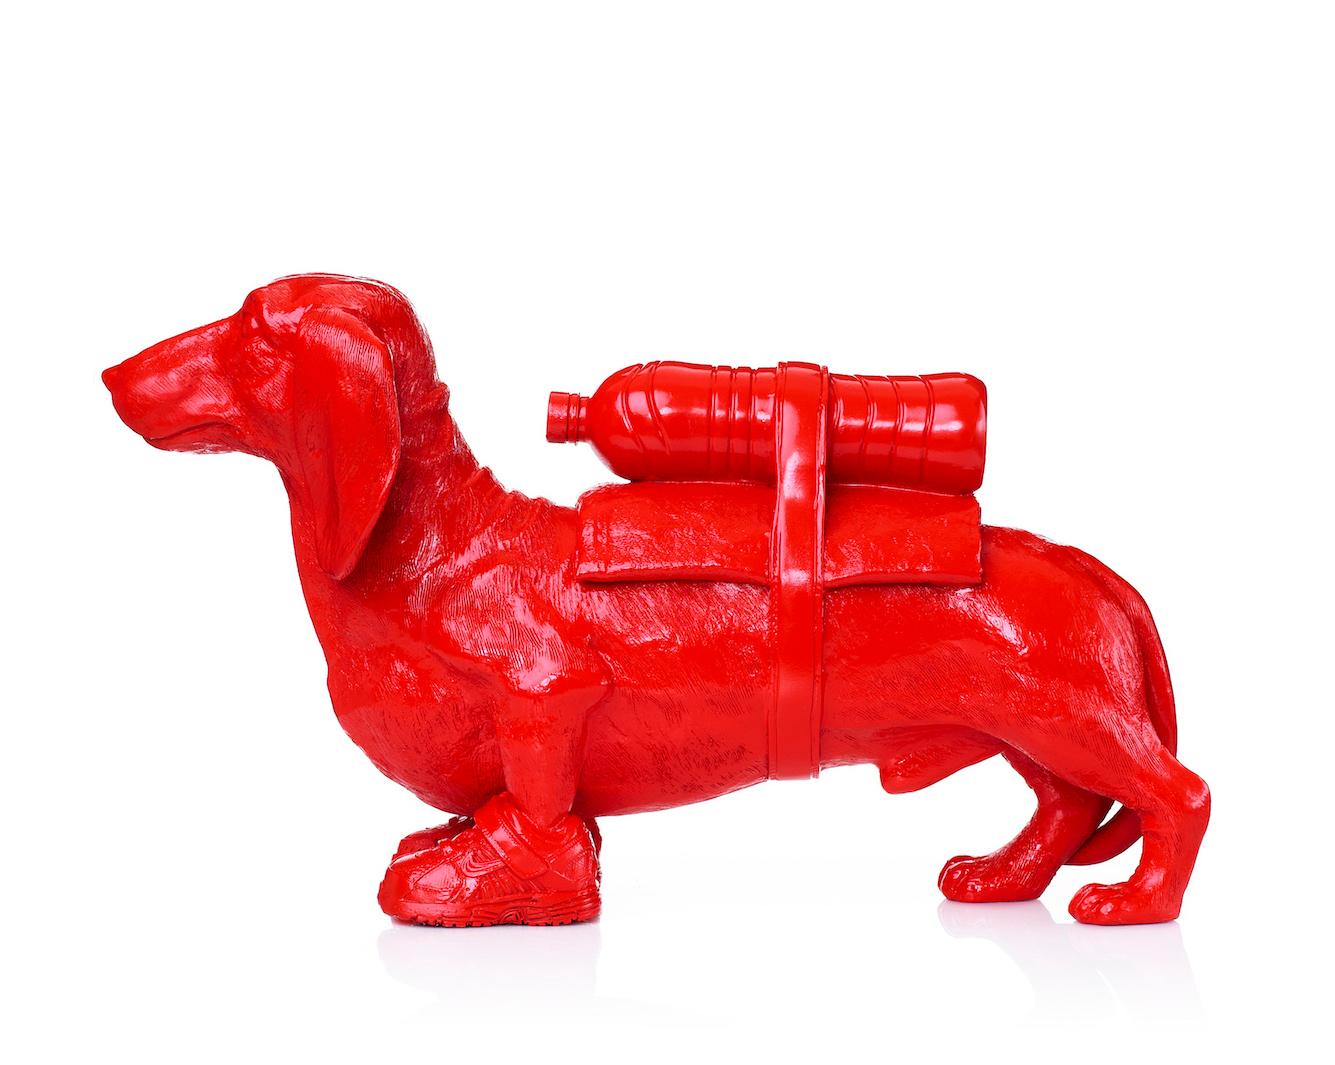 Cloned Dachshund with pet bottle.  - Pop Art Sculpture by William Sweetlove